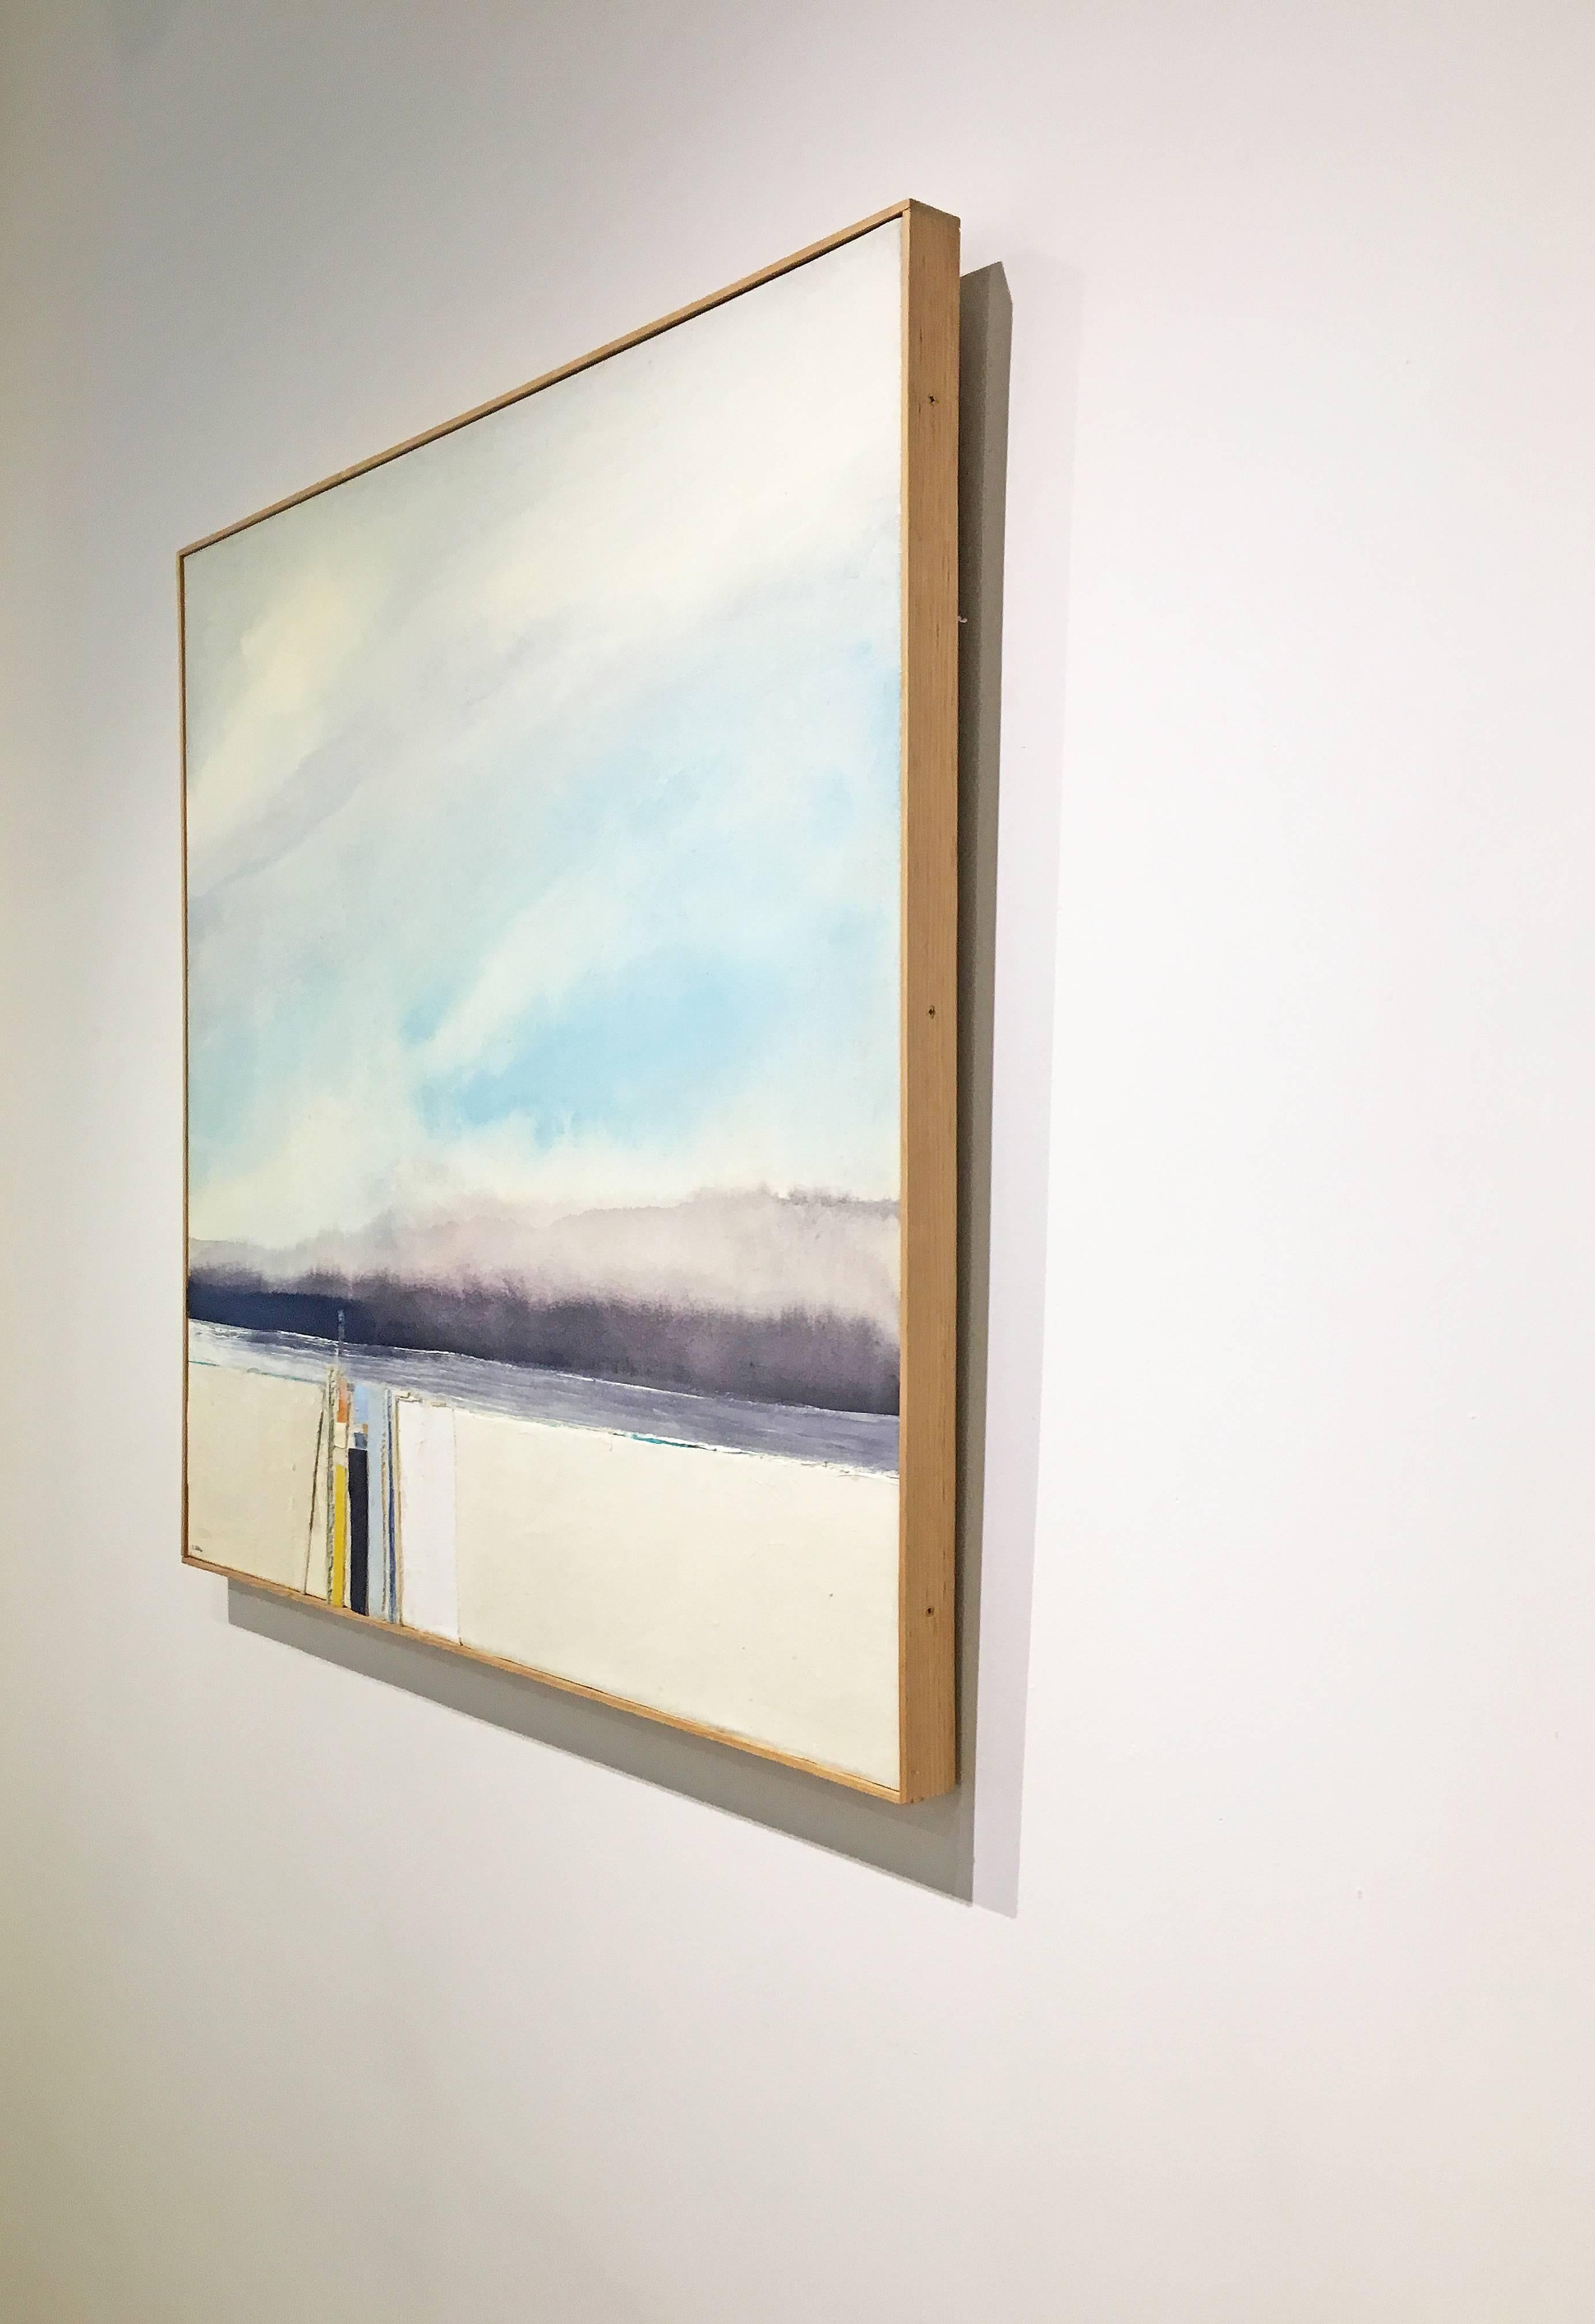 The Landing by Eugene Healy, 2015. Fabric collage and oil on canvas, 36 x 36 inches. This painting features an abstracted seascape with sky and land. In calming colors of blue, purple, grey, and white. The artist incorporates sections of texture and